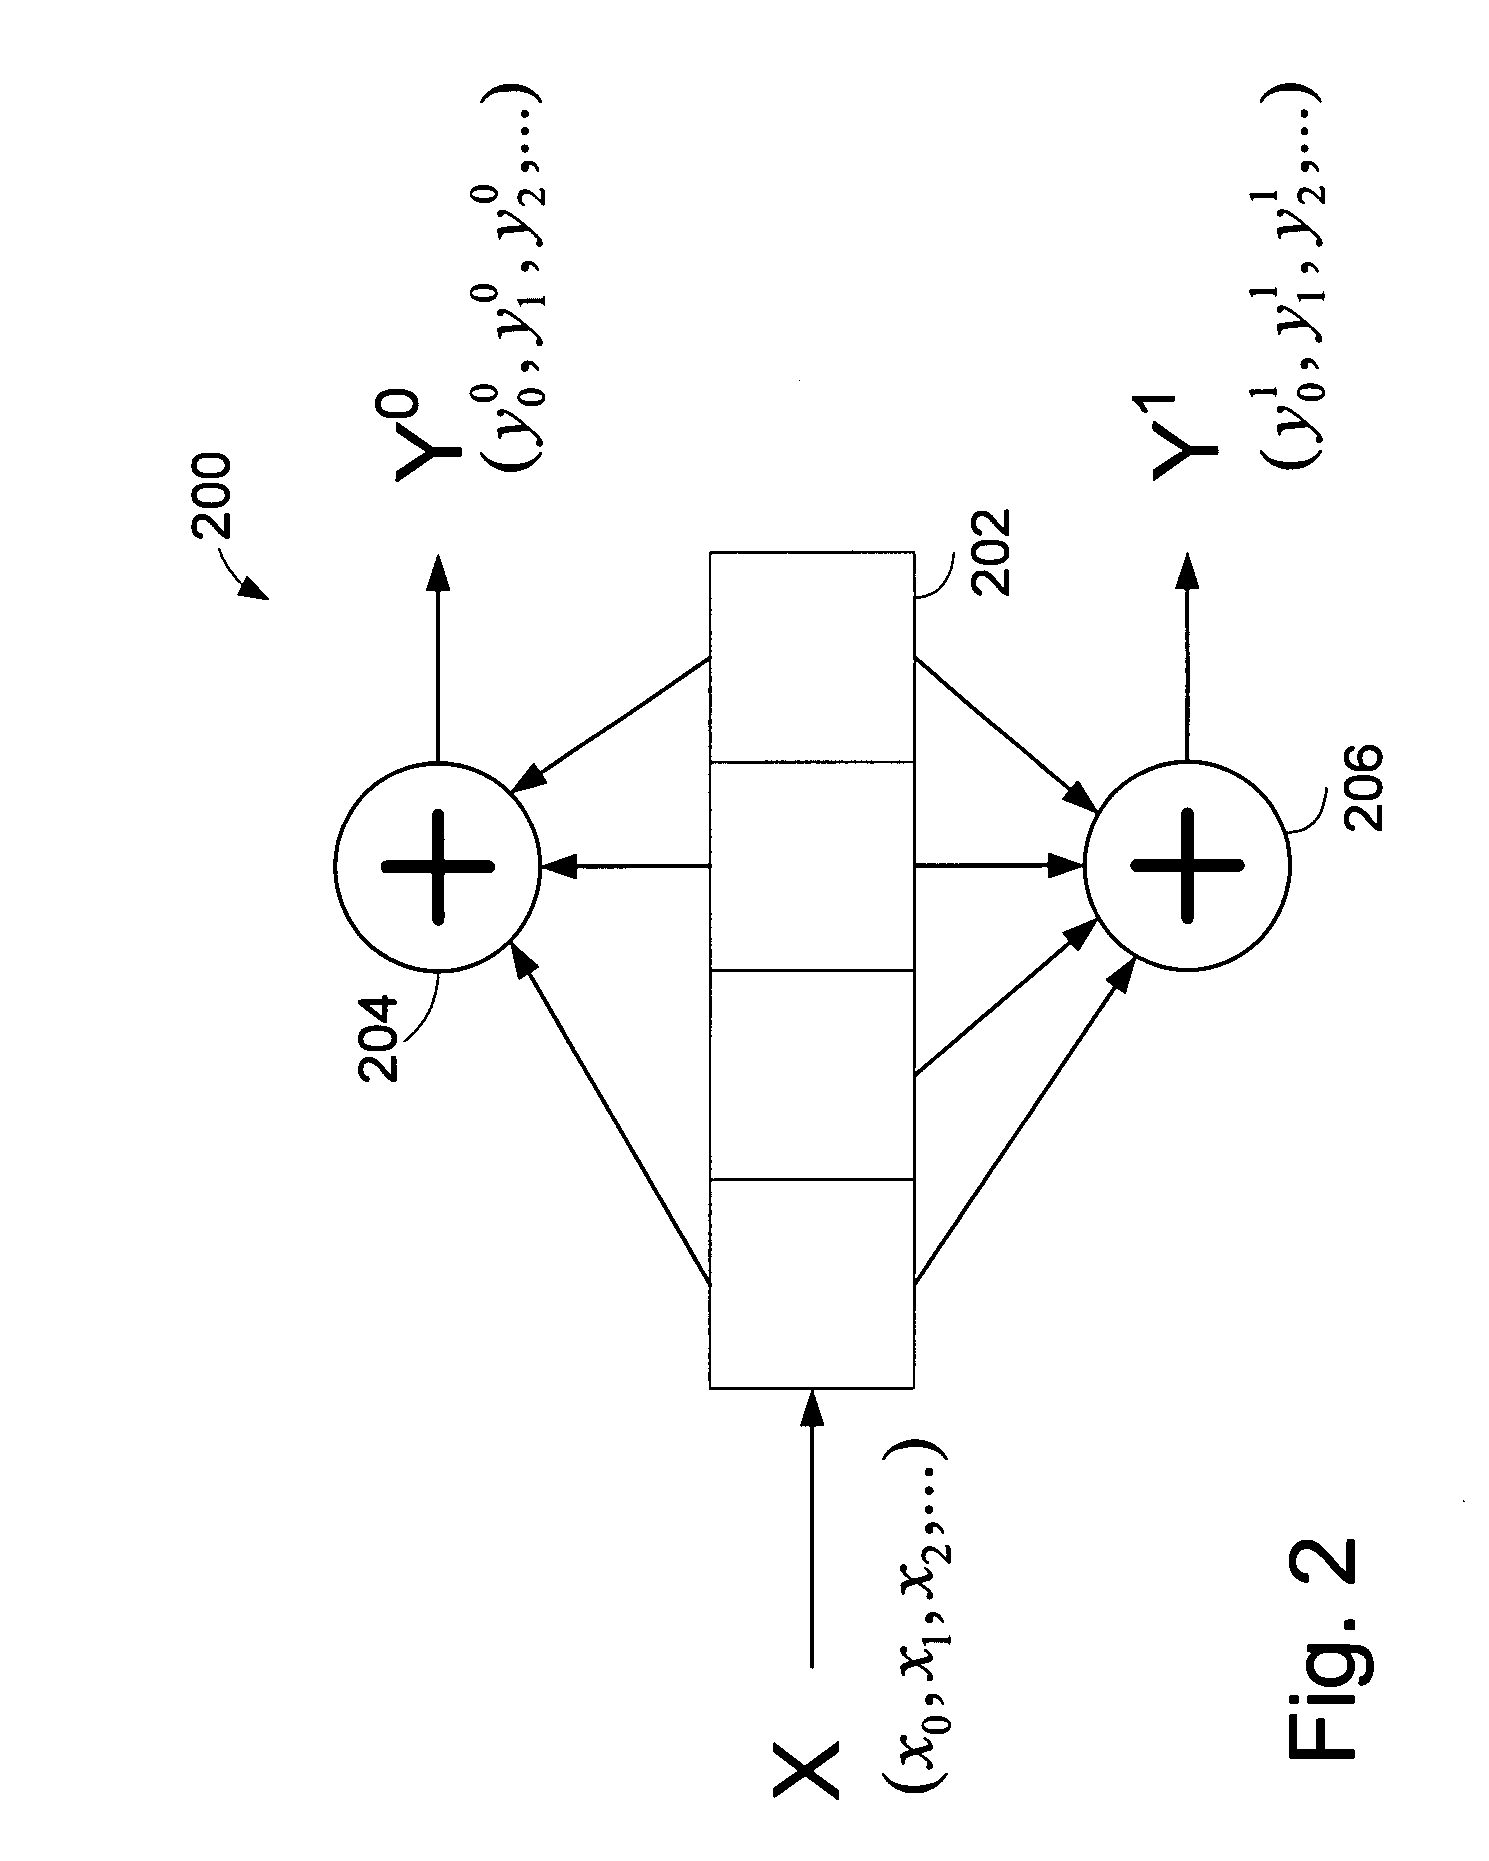 Memory controller supporting rate-compatible punctured codes